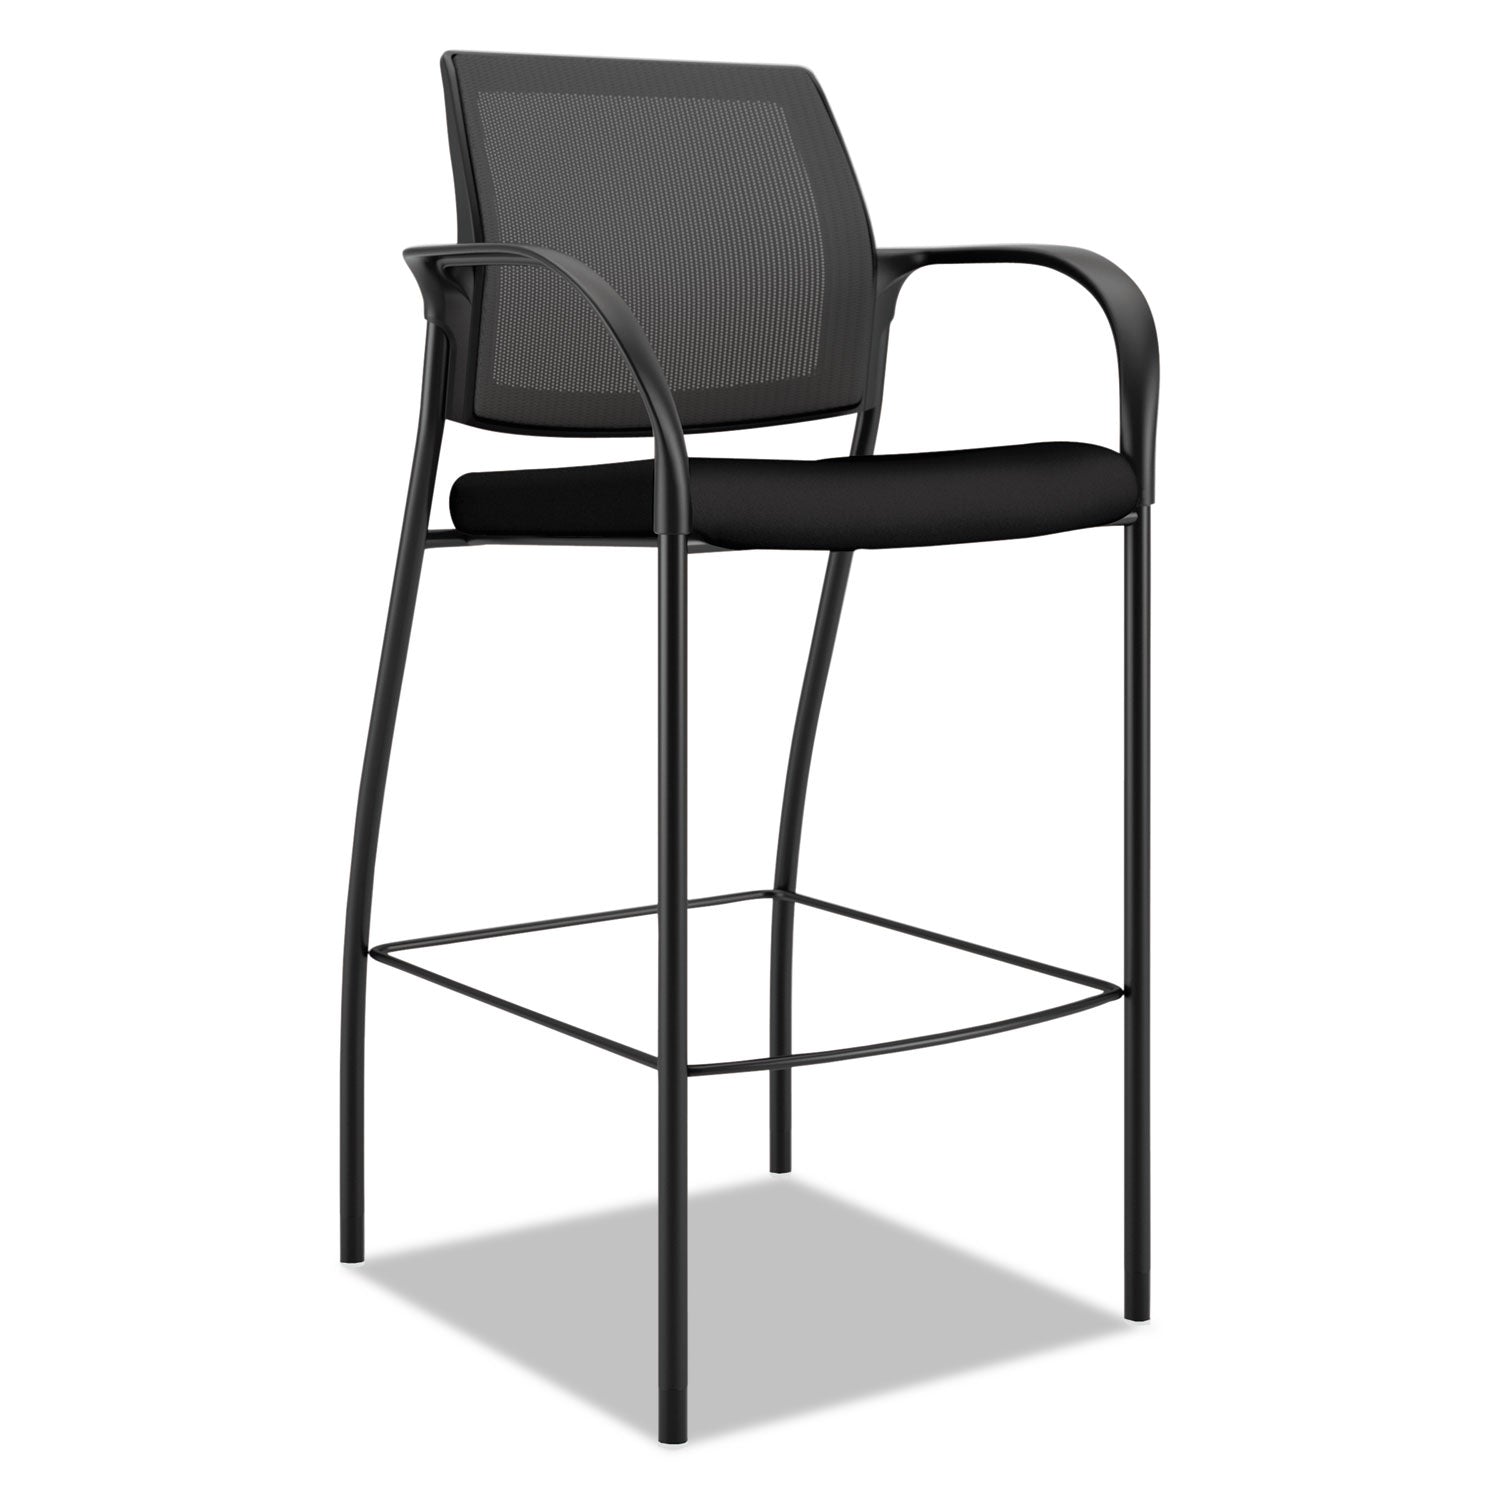 ignition-20-ilira-stretch-mesh-back-cafe-height-stool-supports-up-to-300-lb-31-high-seat-black-seat-back-black-base_honic108imcu10 - 1